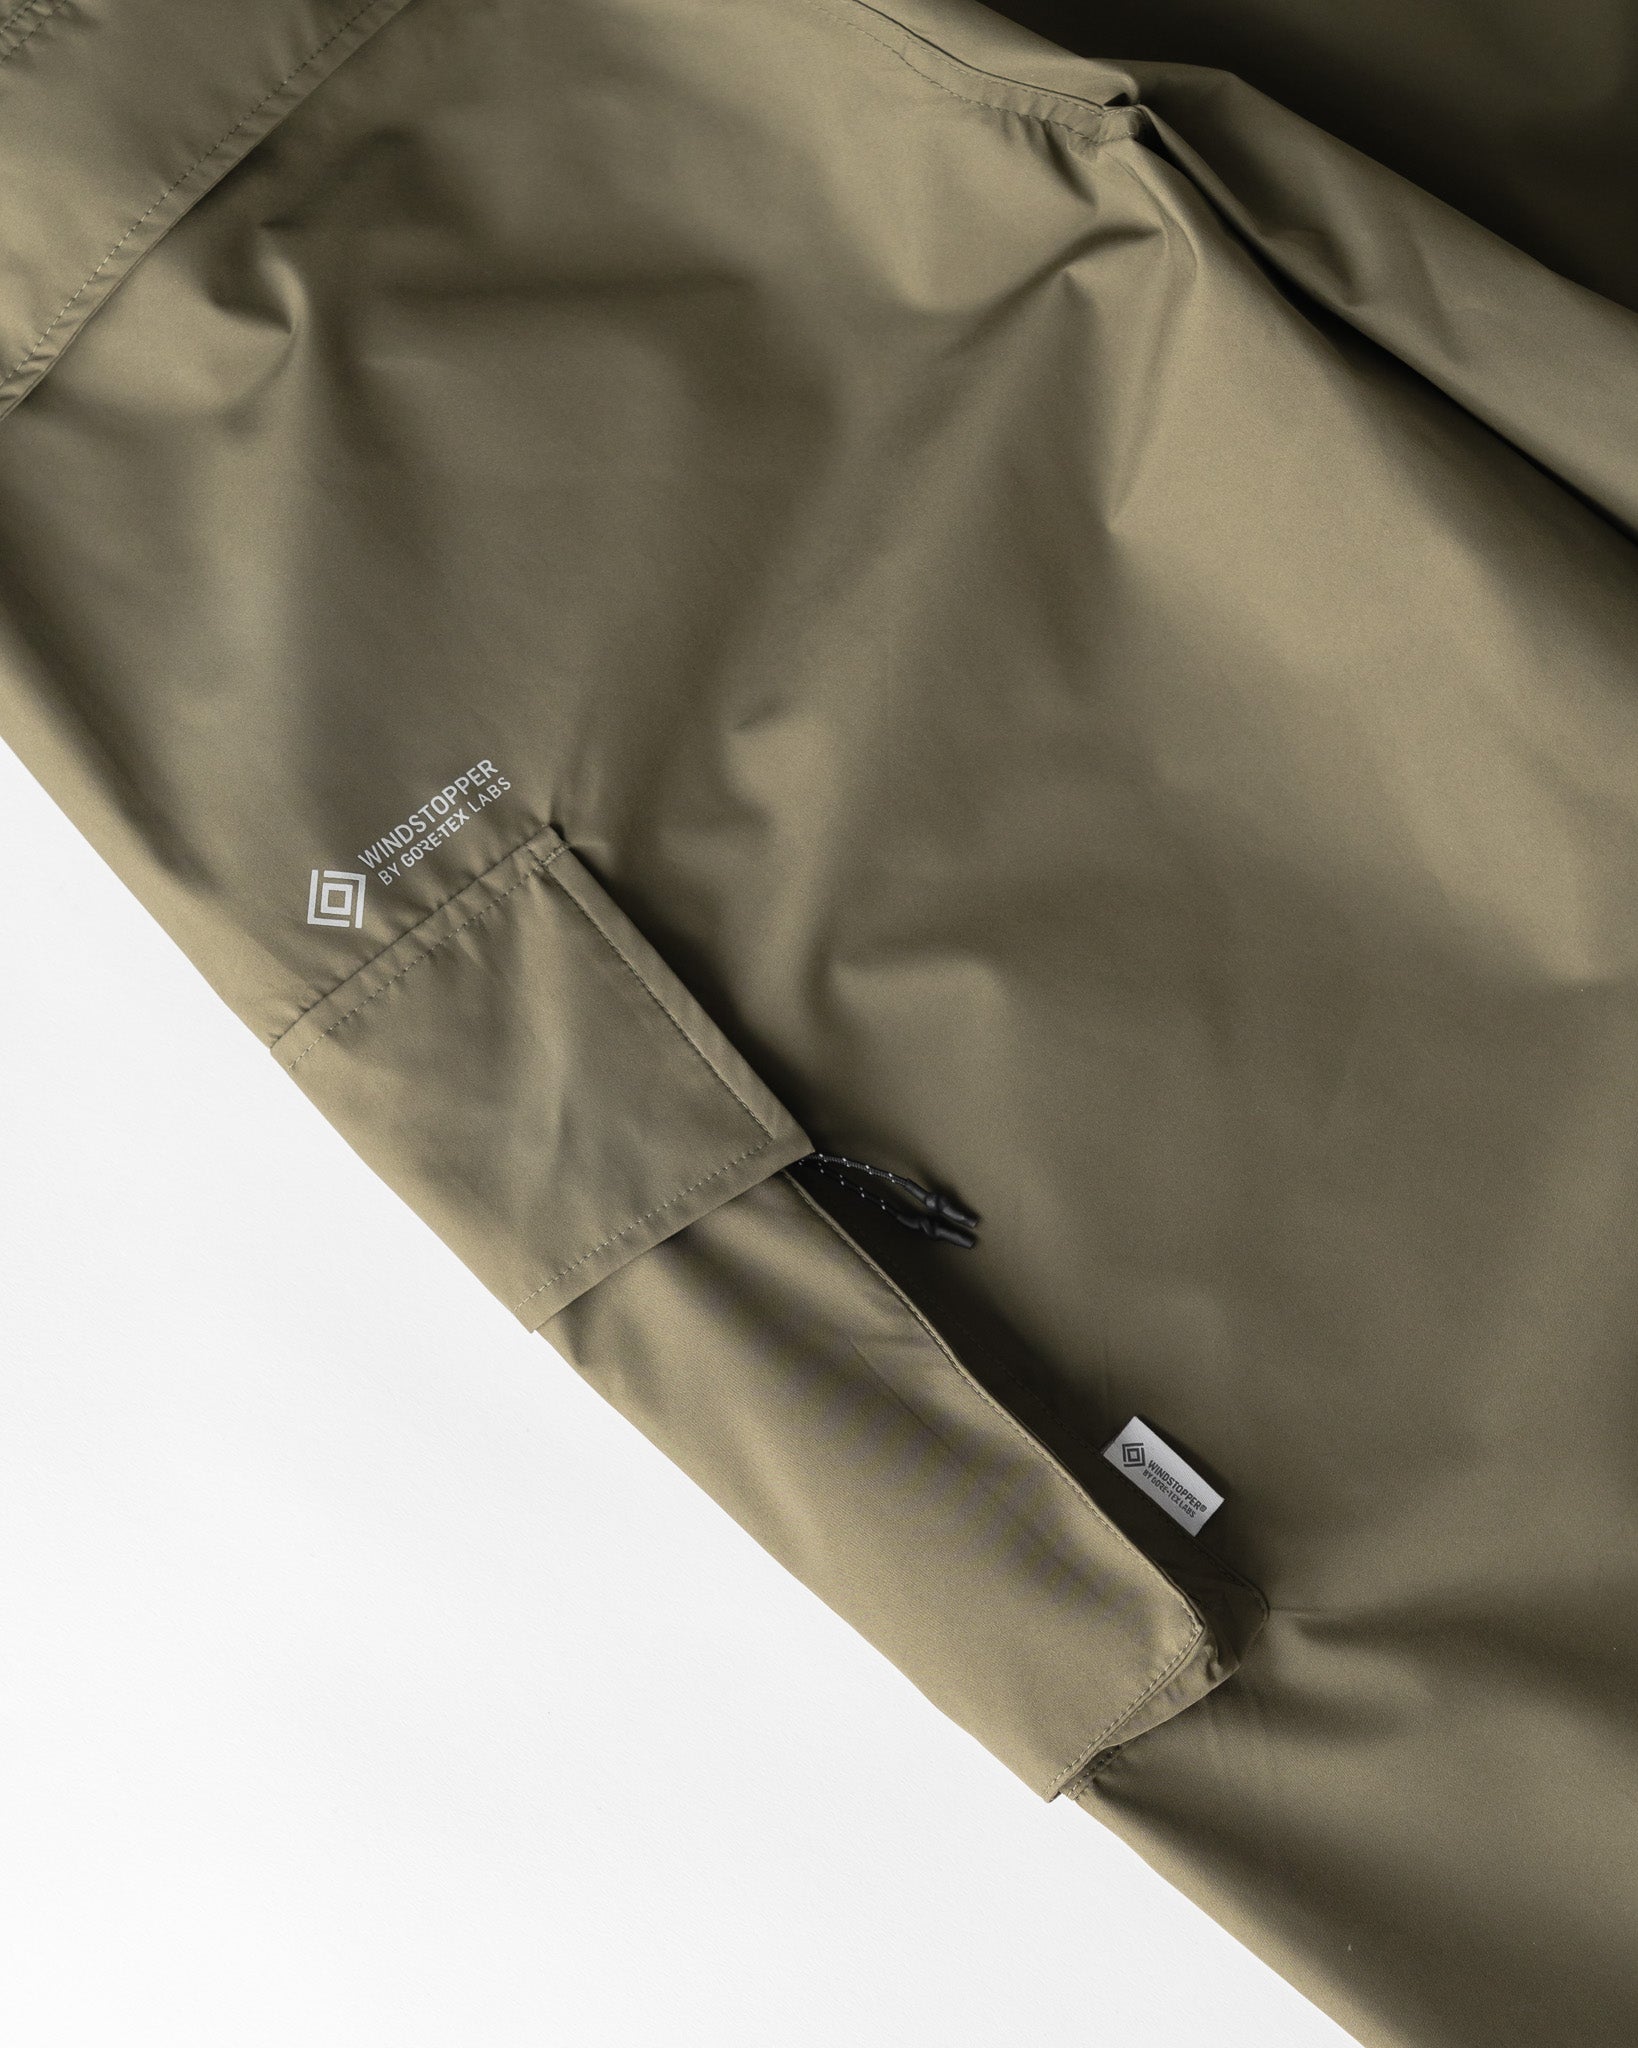 +phenix WINDSTOPPER® by GORE-TEX LABS CITY MILITARY PANTS